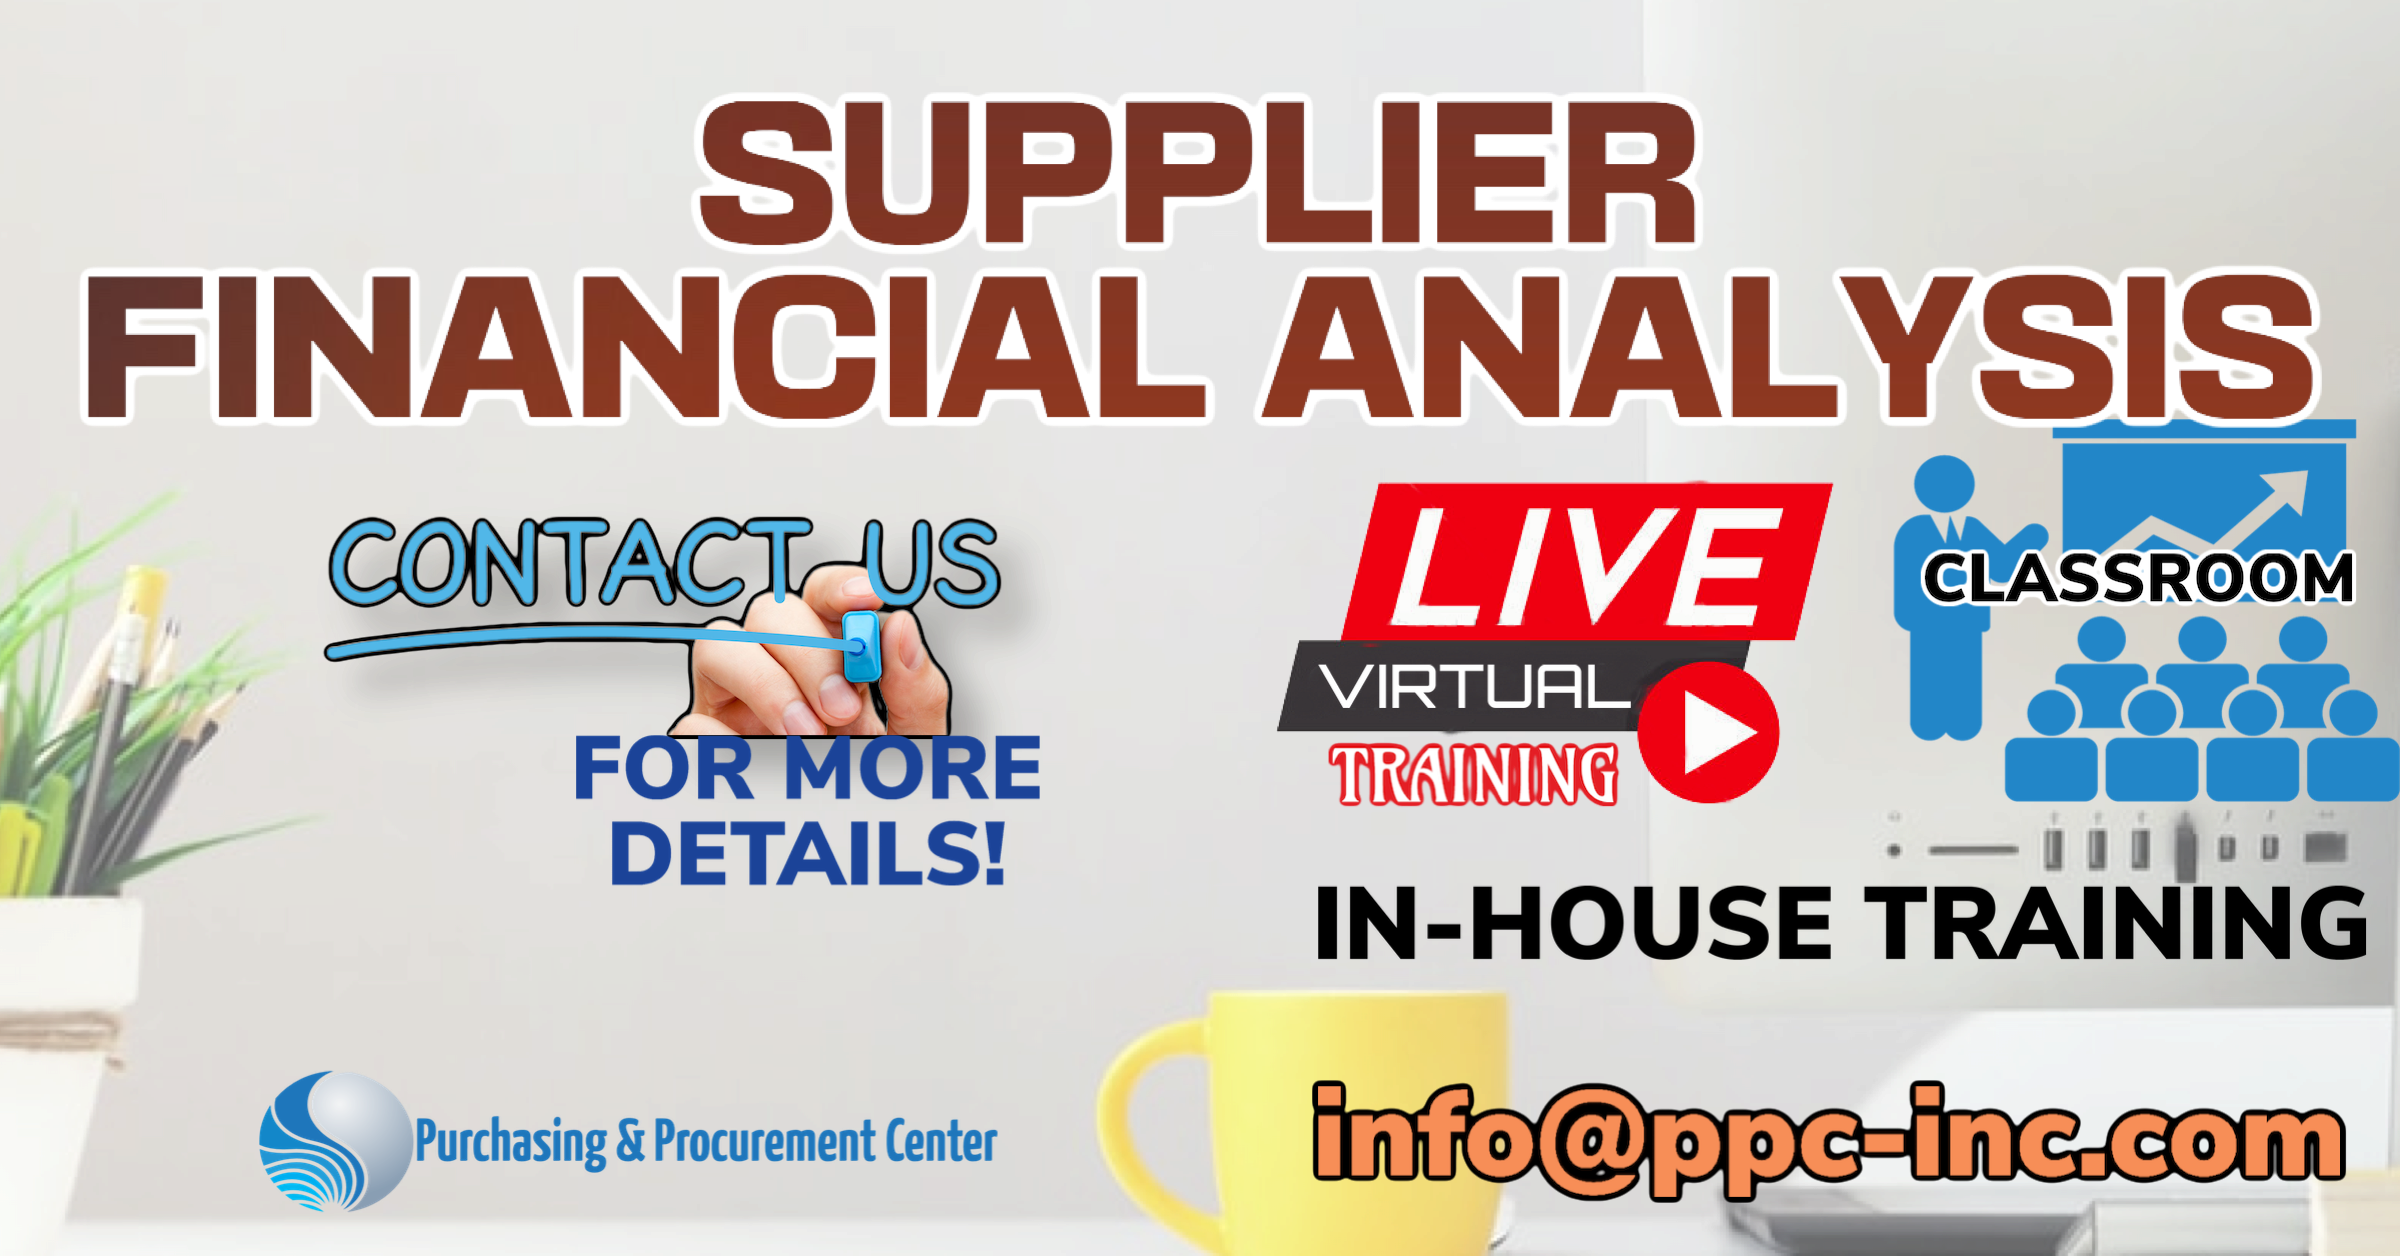 The Supplier Financial Analysis course is a proven set of decision-making tools and financial analysis techniques.